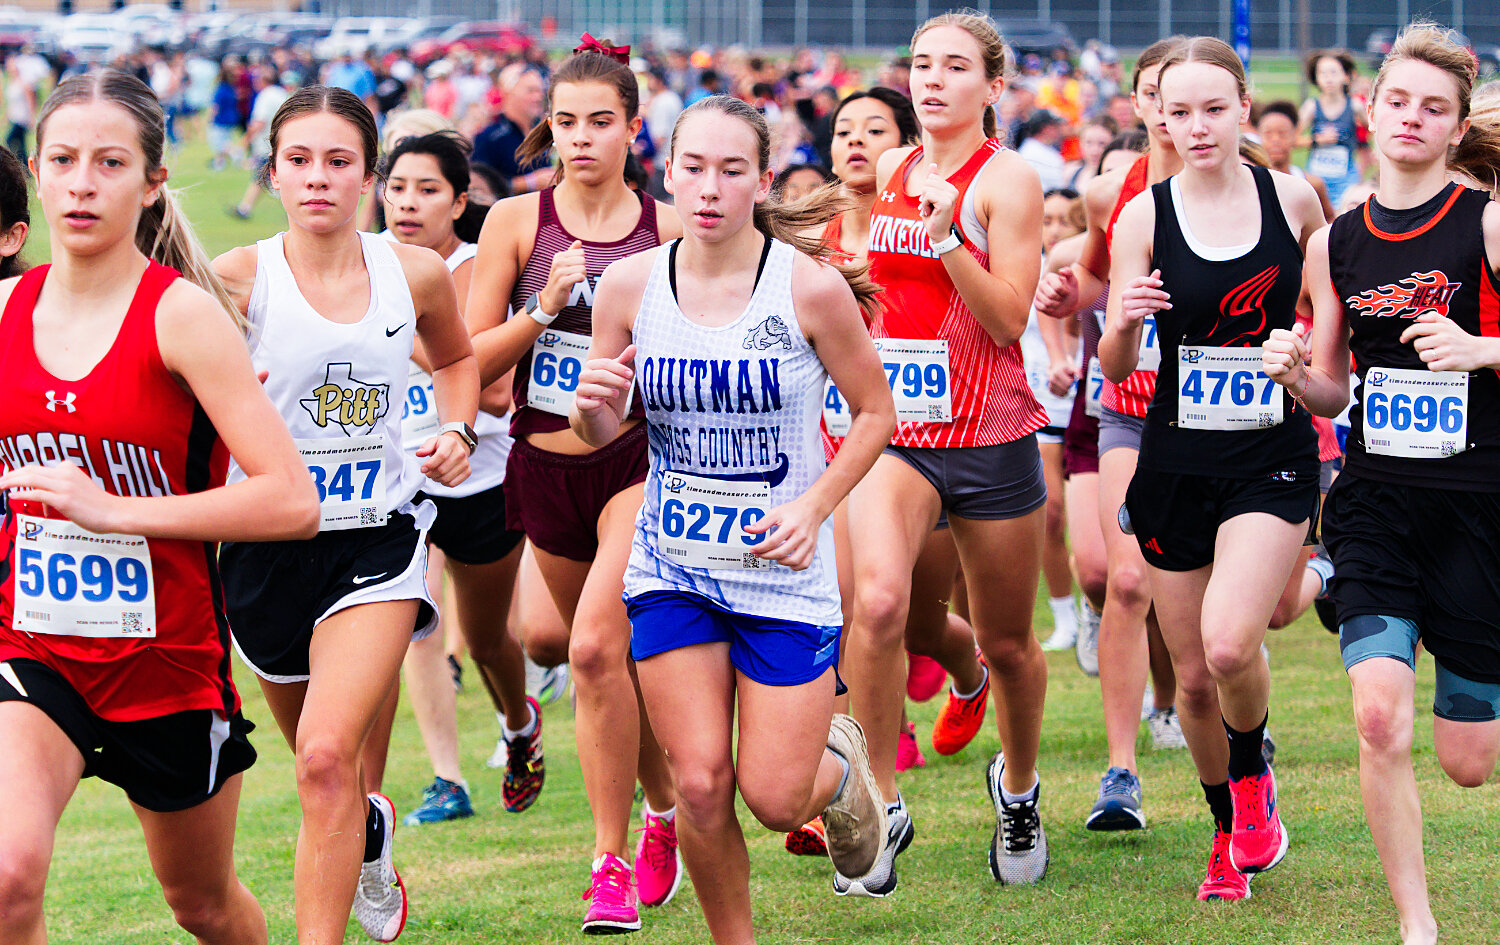 Braleigh Wood (center) of Quitman, trailed closely by Raylie Peebles of Mineola, get off to a quick start, eventually finishing first and sixth, respectively. [catch the cross-country competition]